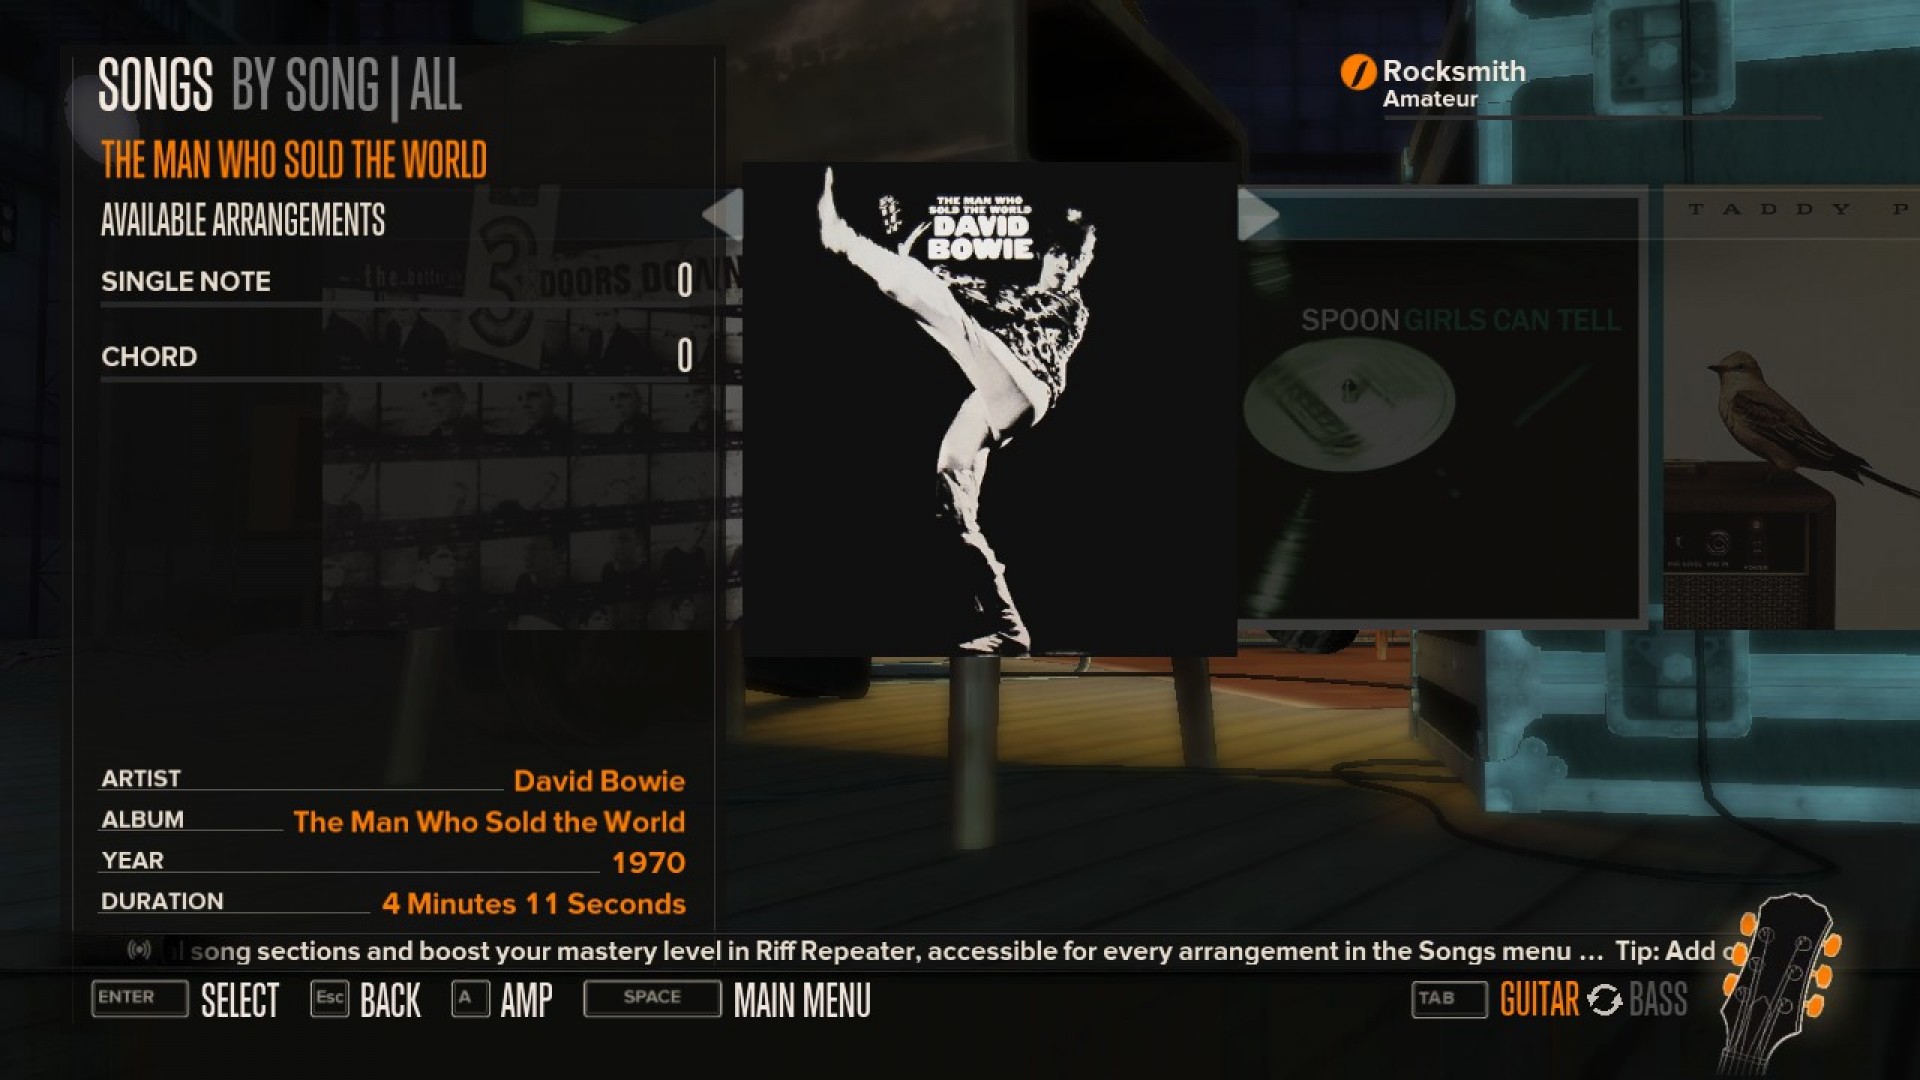 Rocksmith - David Bowie - The Man Who Sold The World screenshot